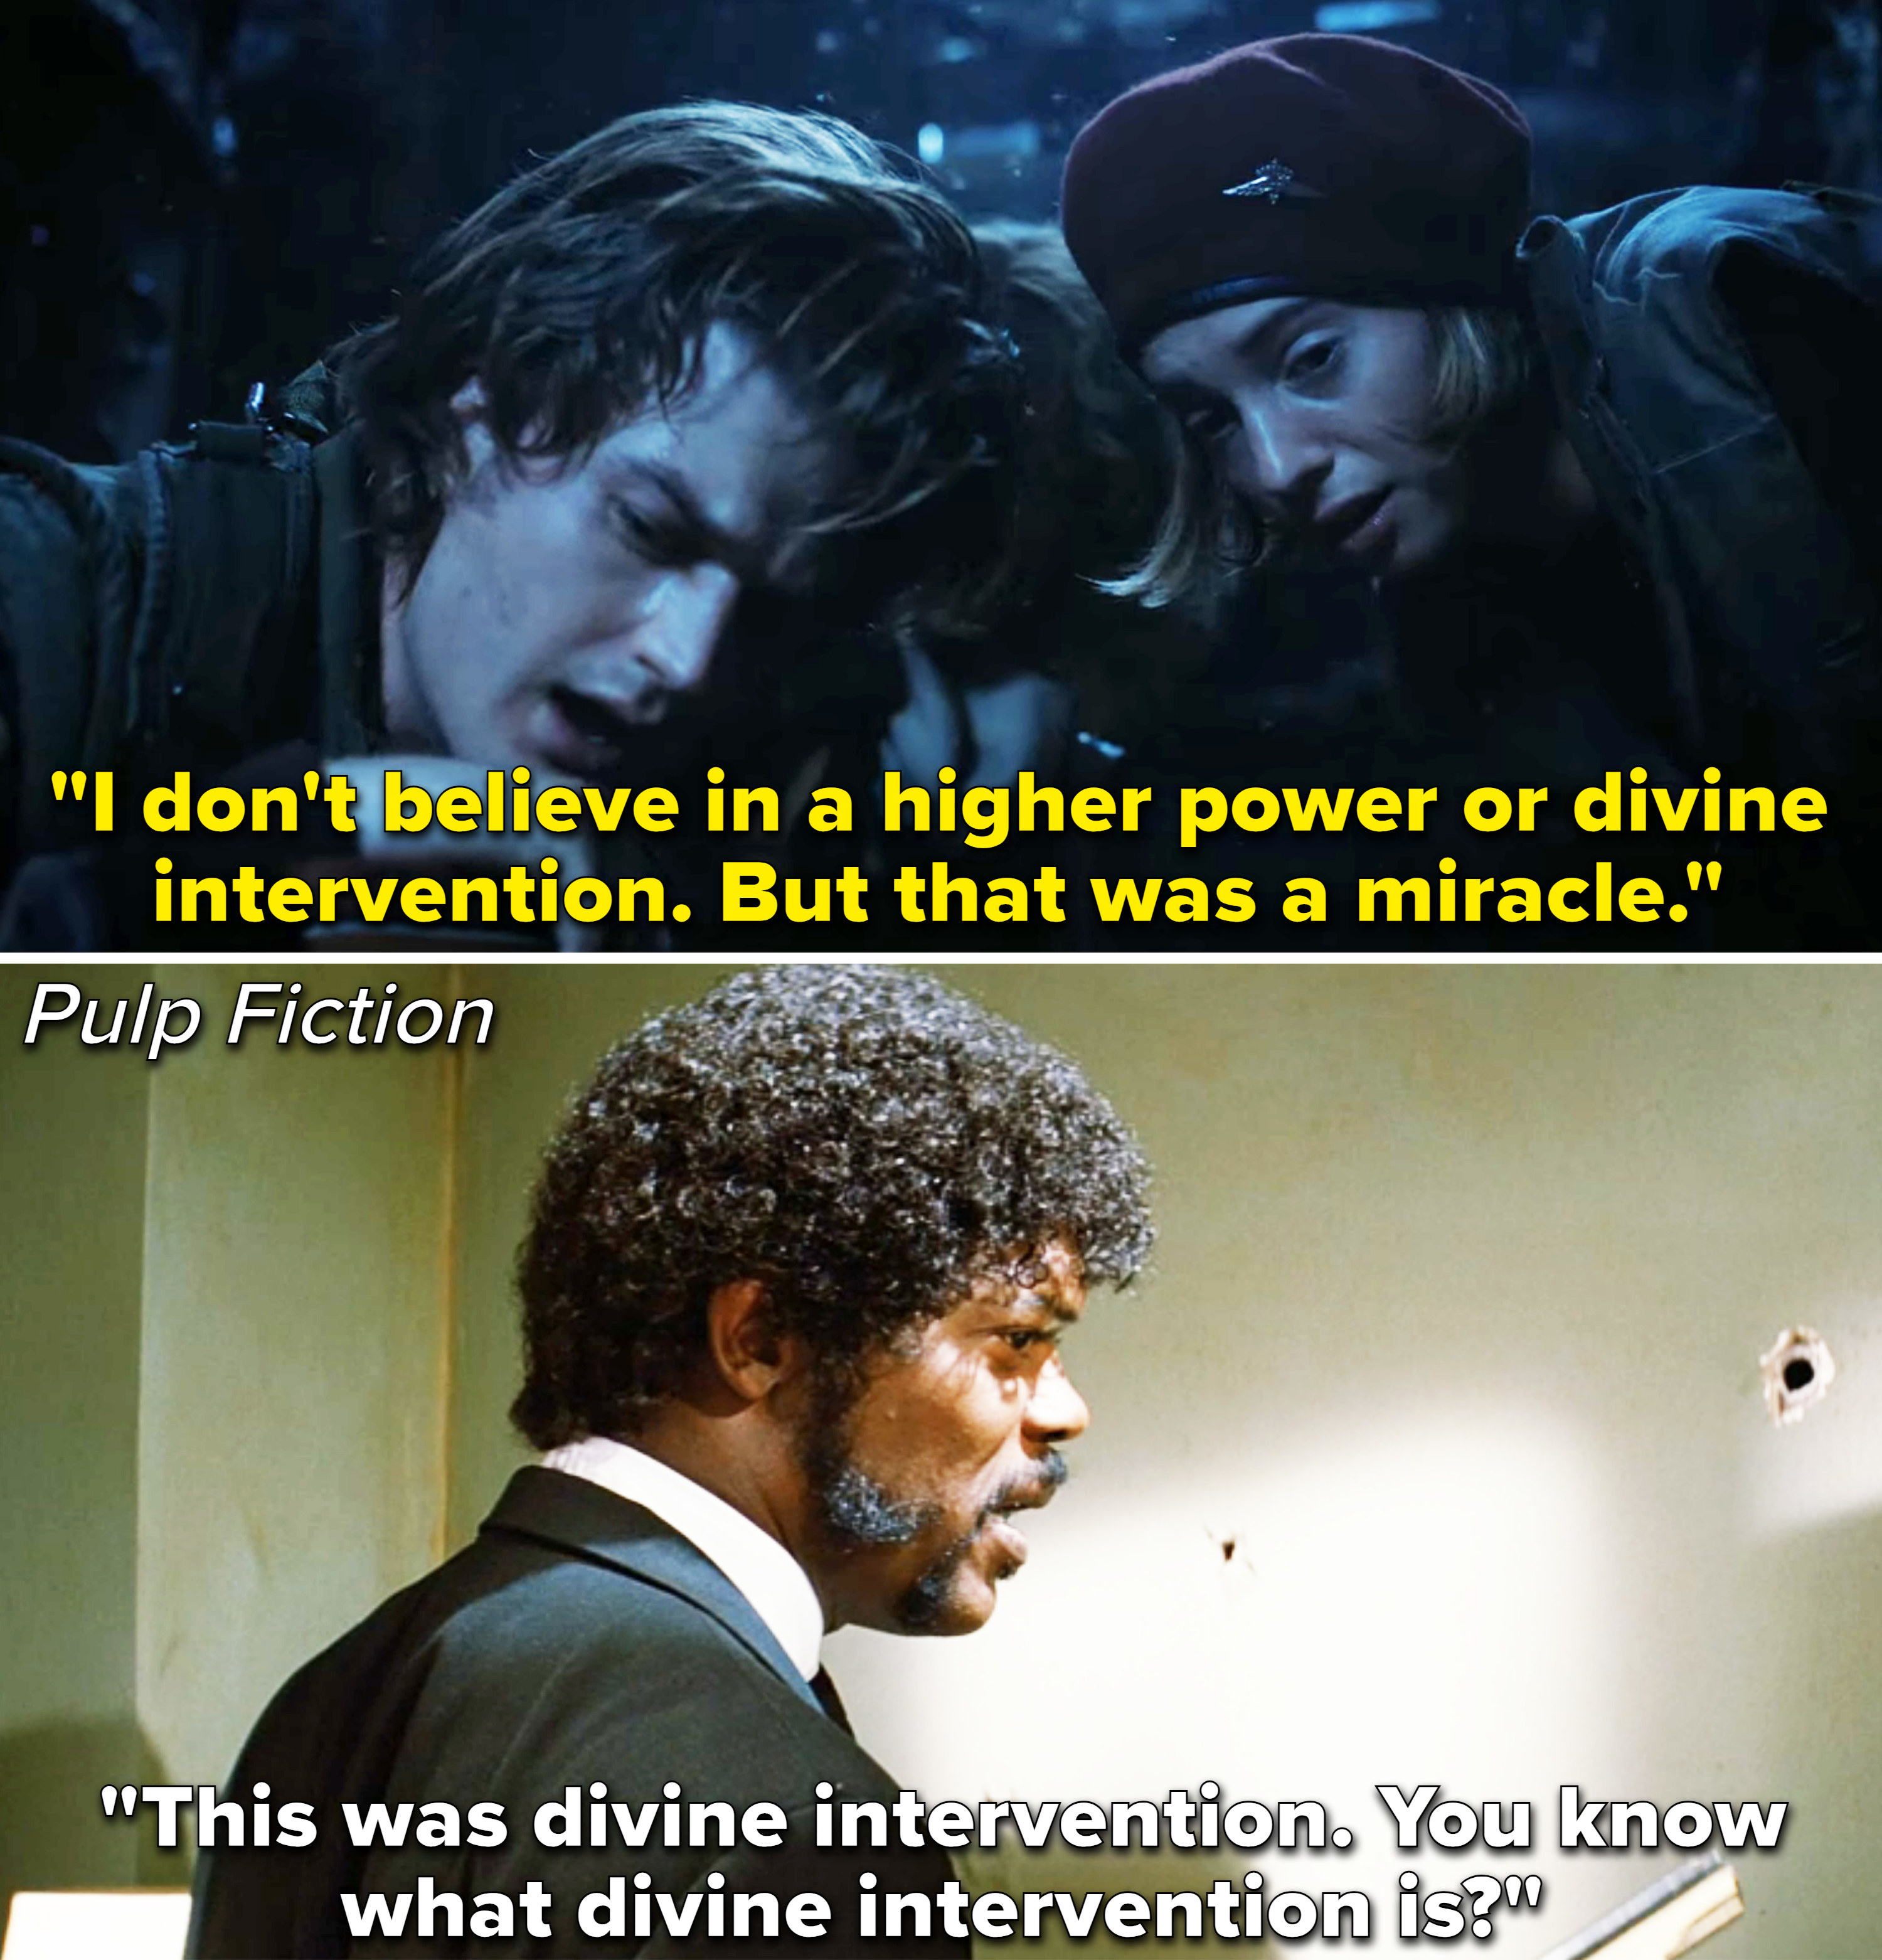 both characters talking about a divine intervention